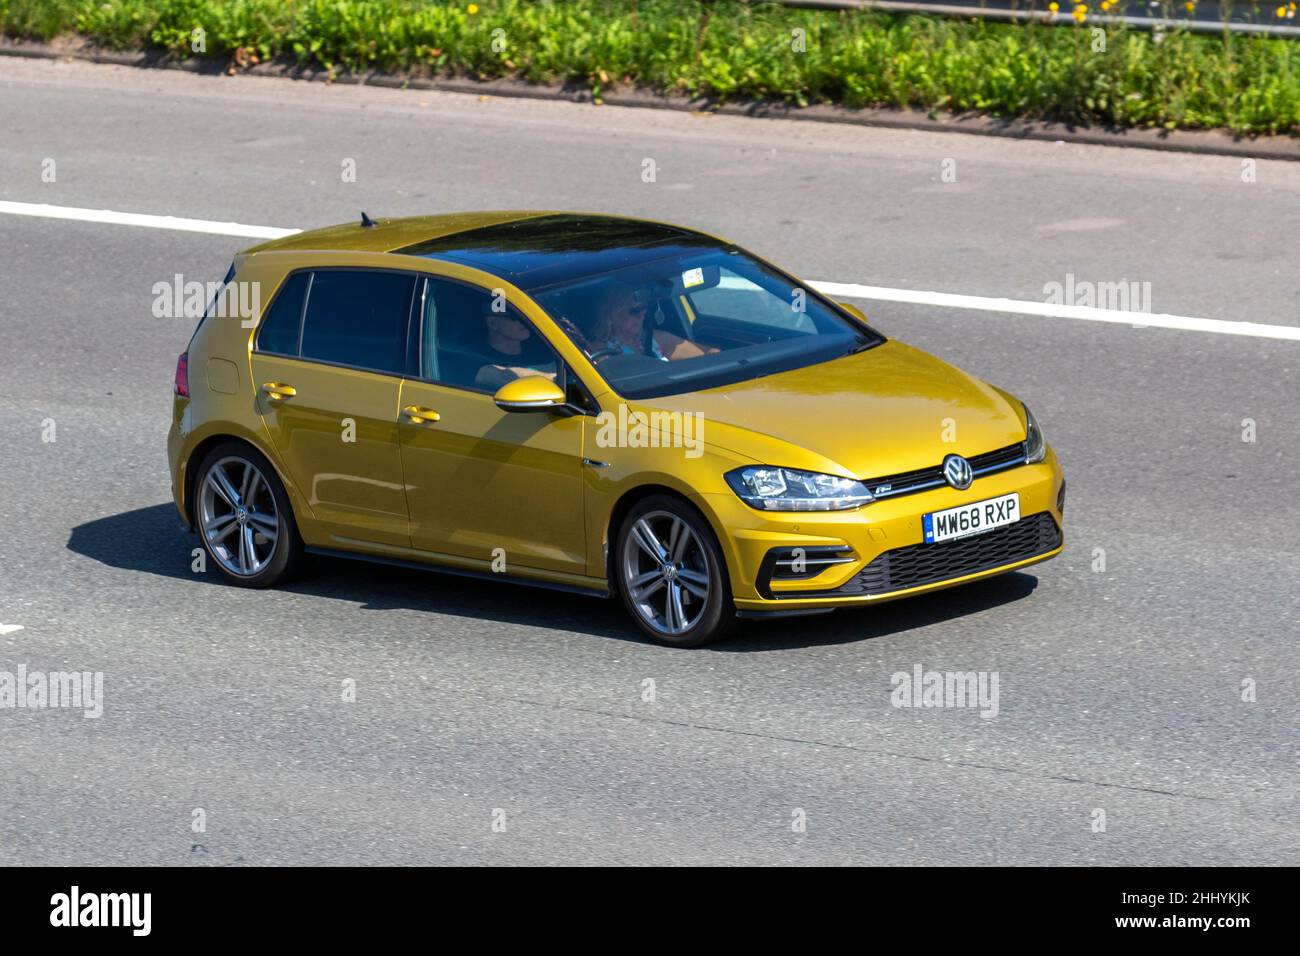 2019 Yellow Gold VW Volkswagen Golf 1498cc 4dr; Vehicular traffic, moving vehicles, cars, vehicle driving on UK roads, motors, motoring on the M6 motorway highway UK road network. Stock Photo